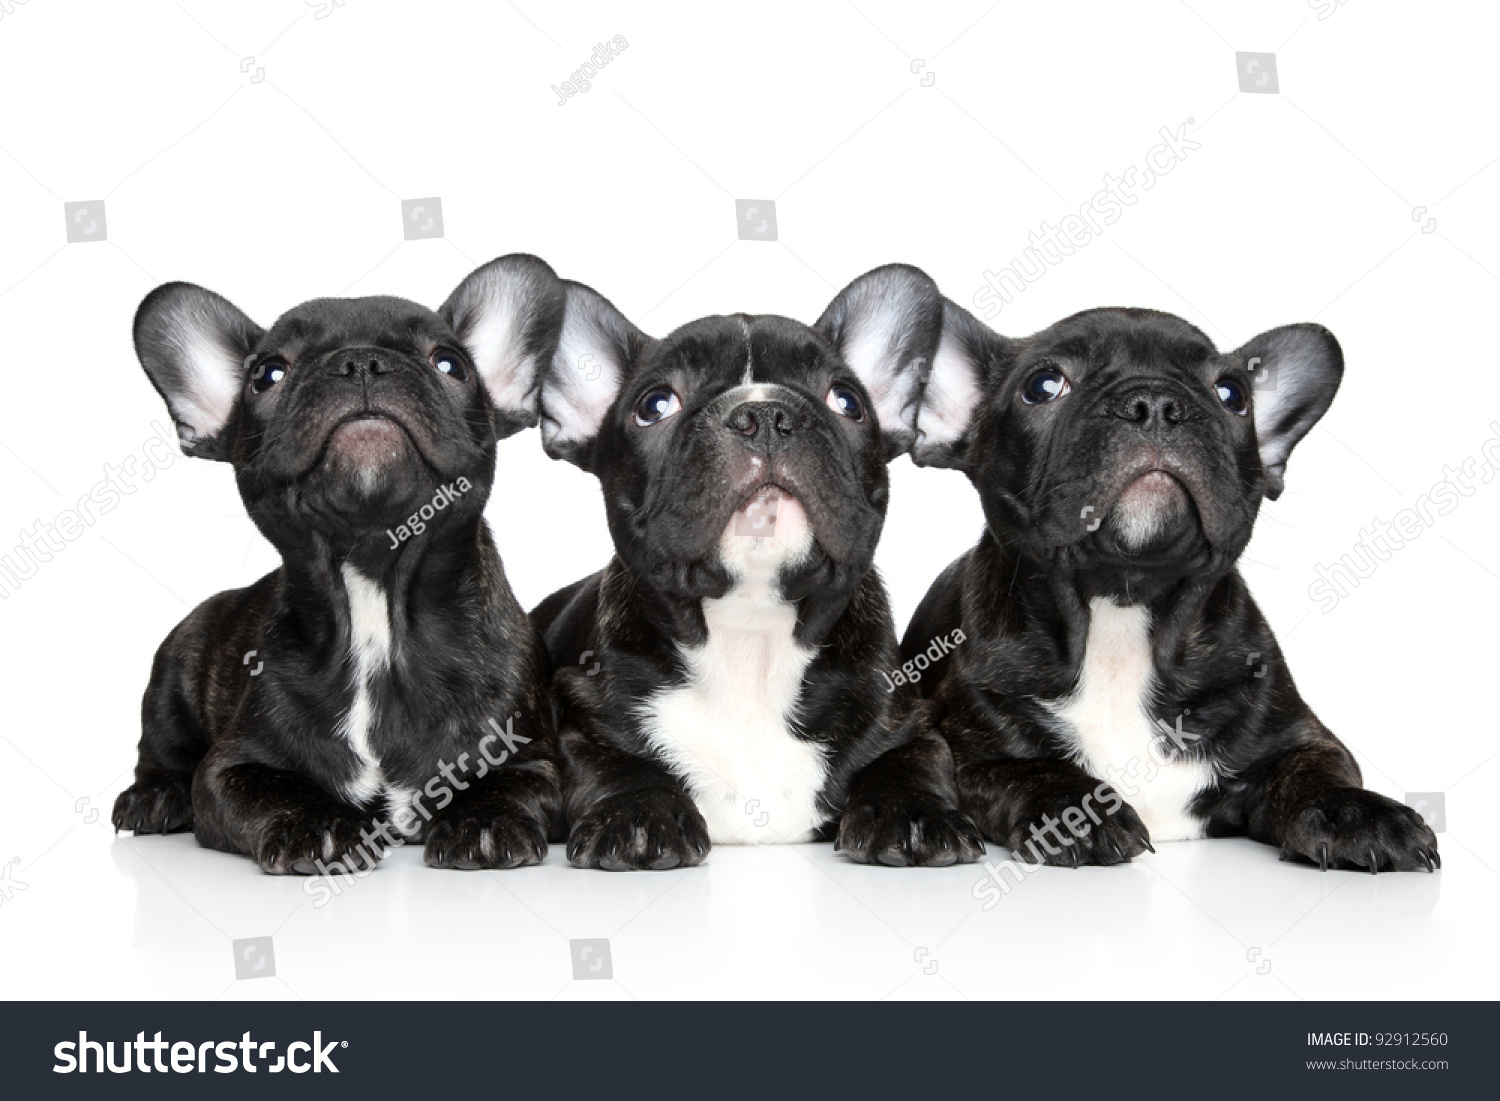 Black French Bulldog Puppies Look On Stock Photo 92912560 - Shutterstock